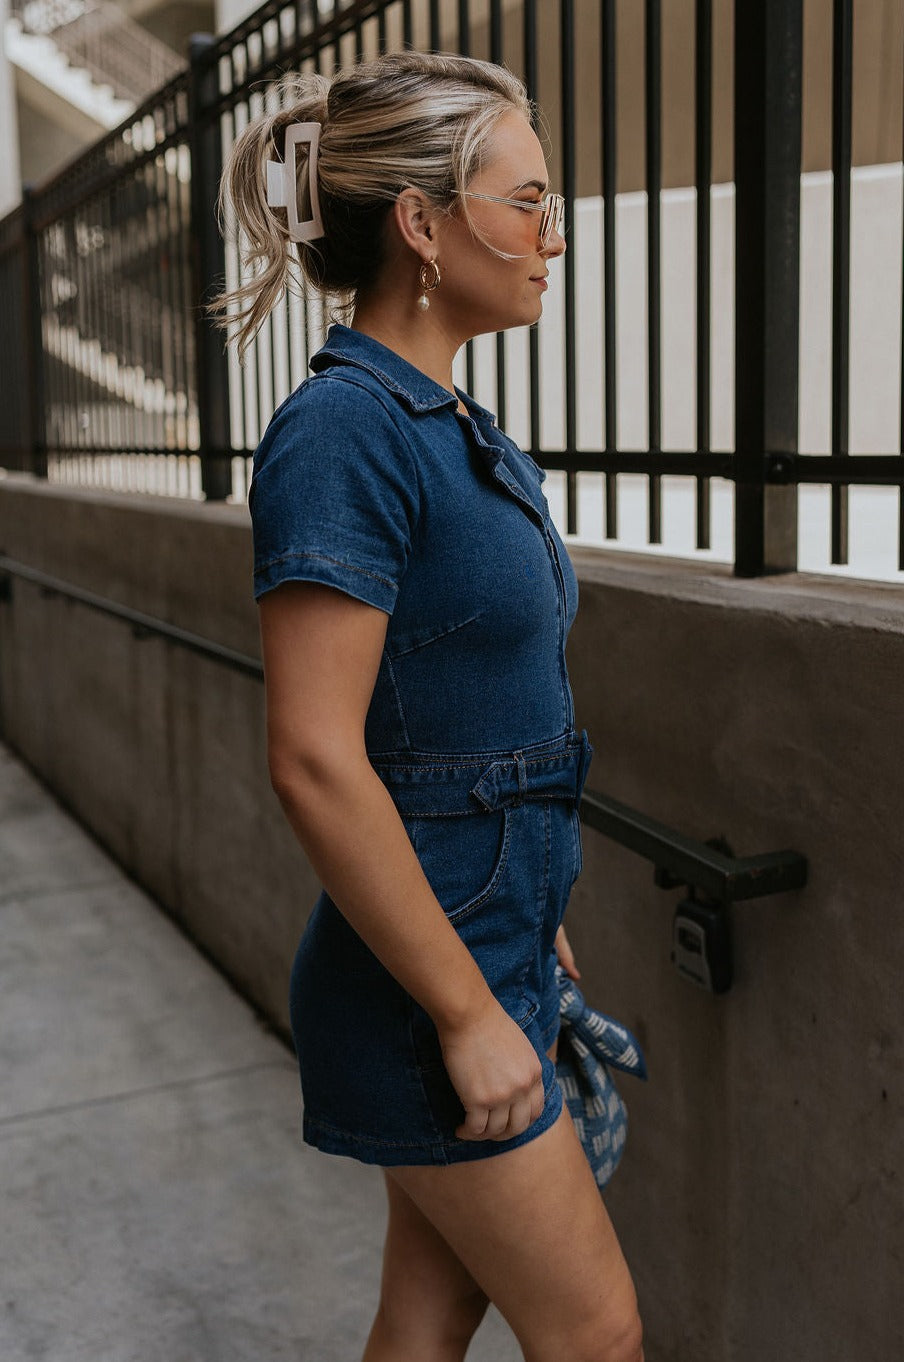 Side view of female model wearing the Mavis Denim Short Sleeve Zip-Up Romper which features Denim Fabric, Two Front Pockets, Front Zipper Closure, Adjustable Monochrome Belt with Loops, Collared Neckline and Short Sleeves